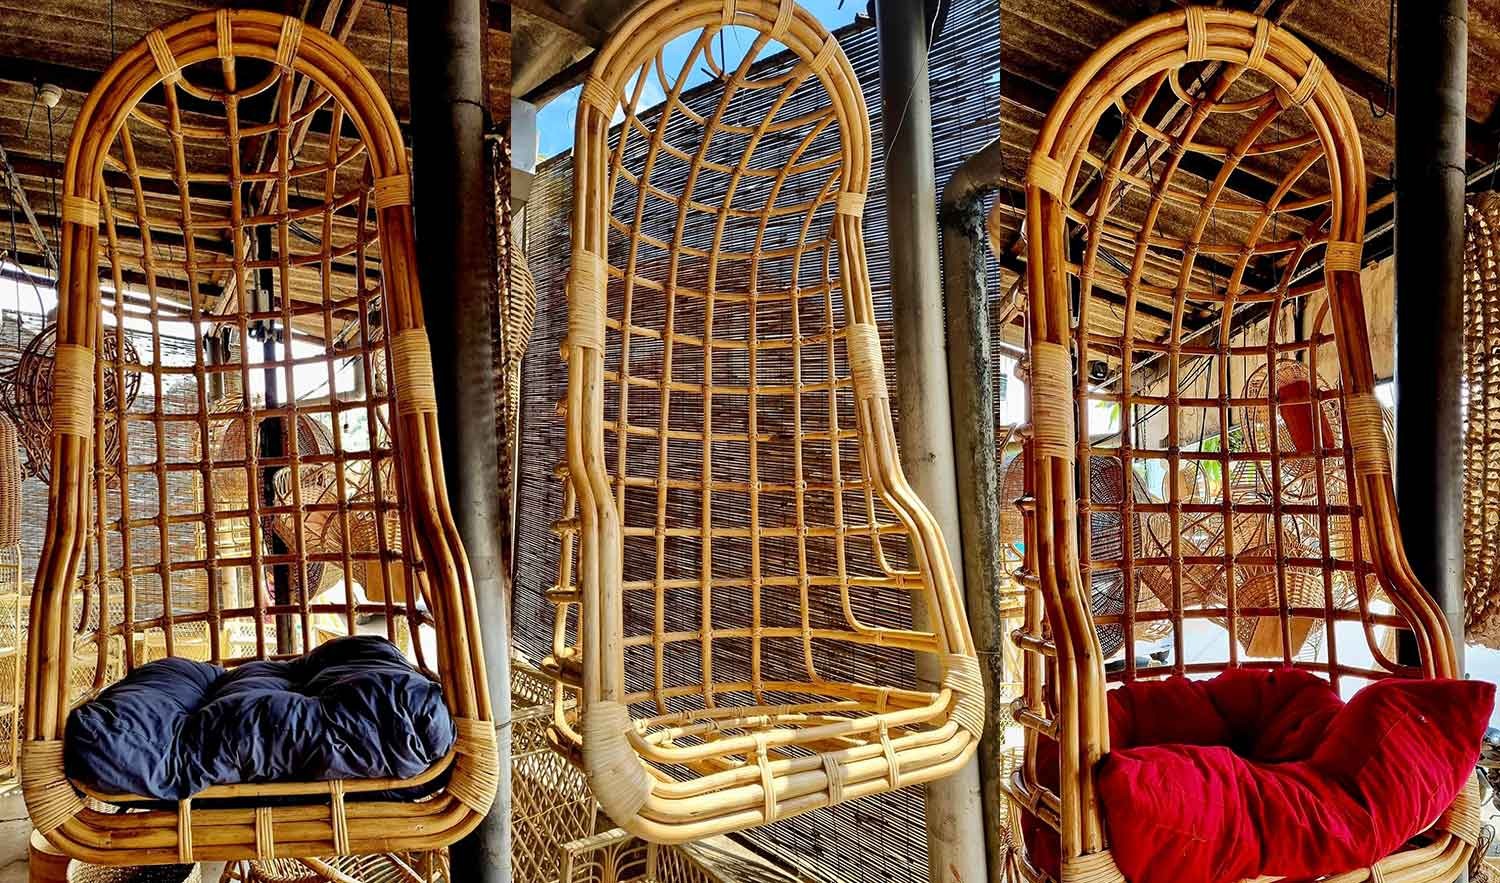 Cane Hanging Chair